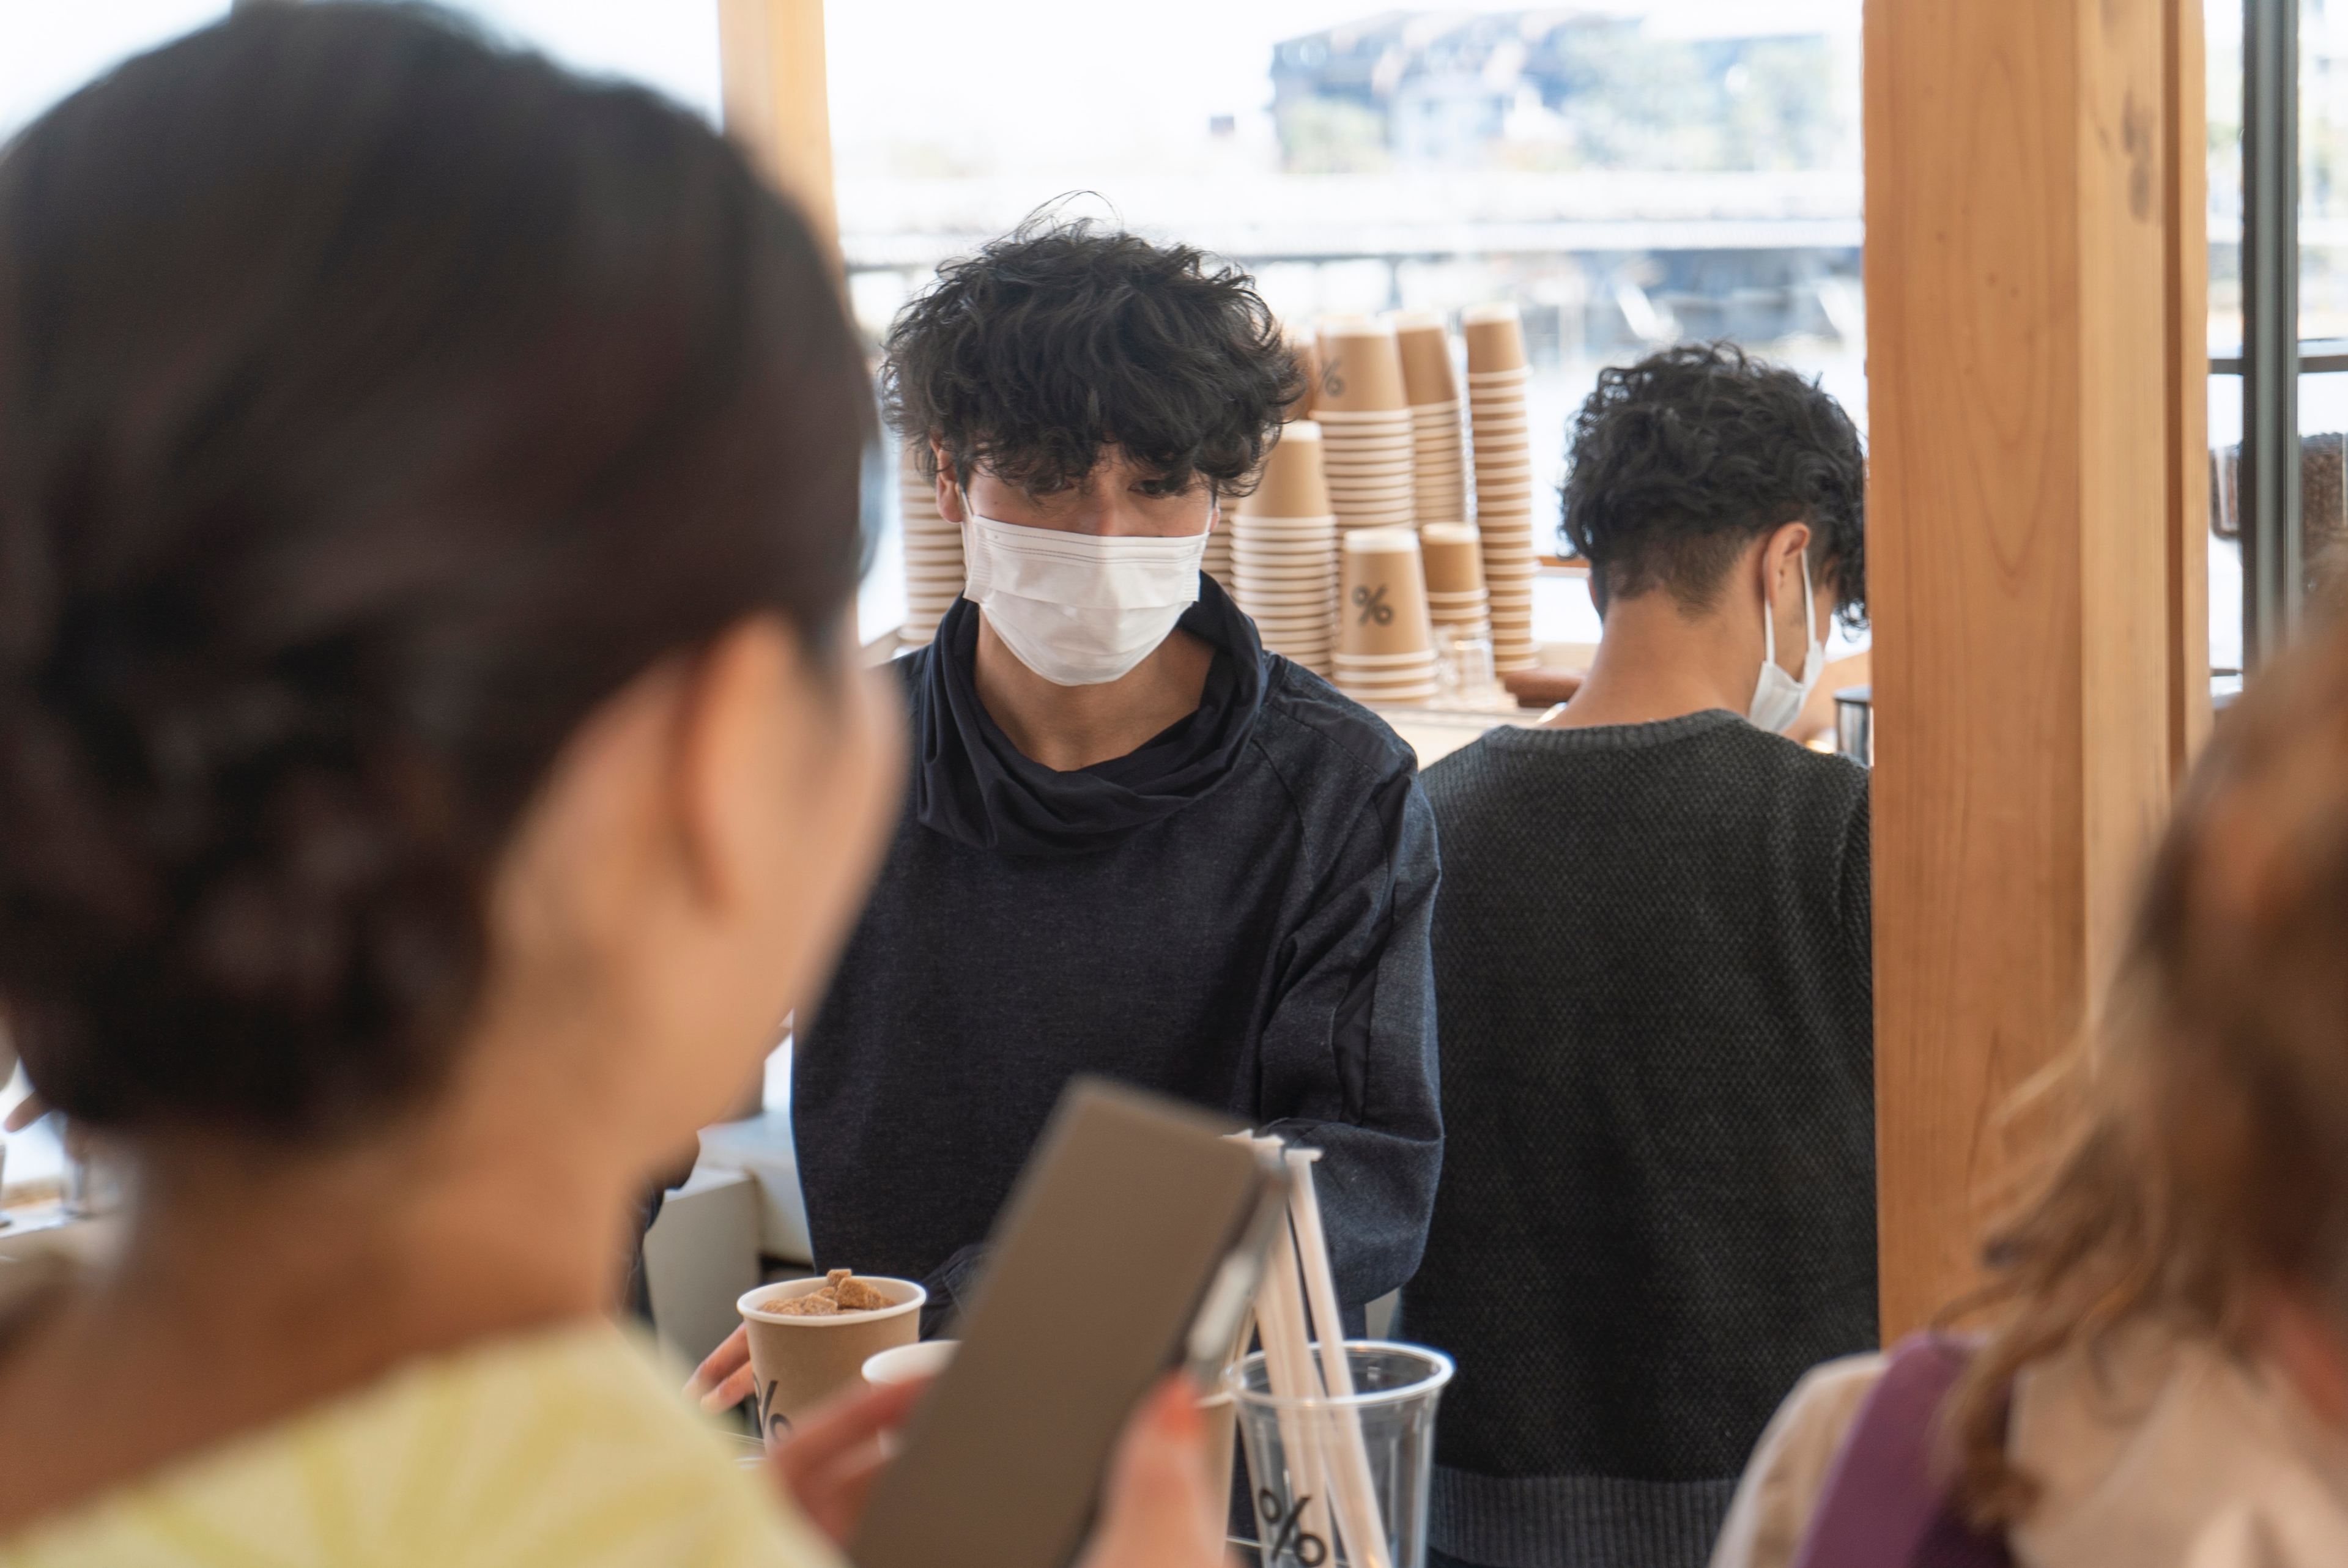 a person wearing a surgical mask serves coffee behind a counter